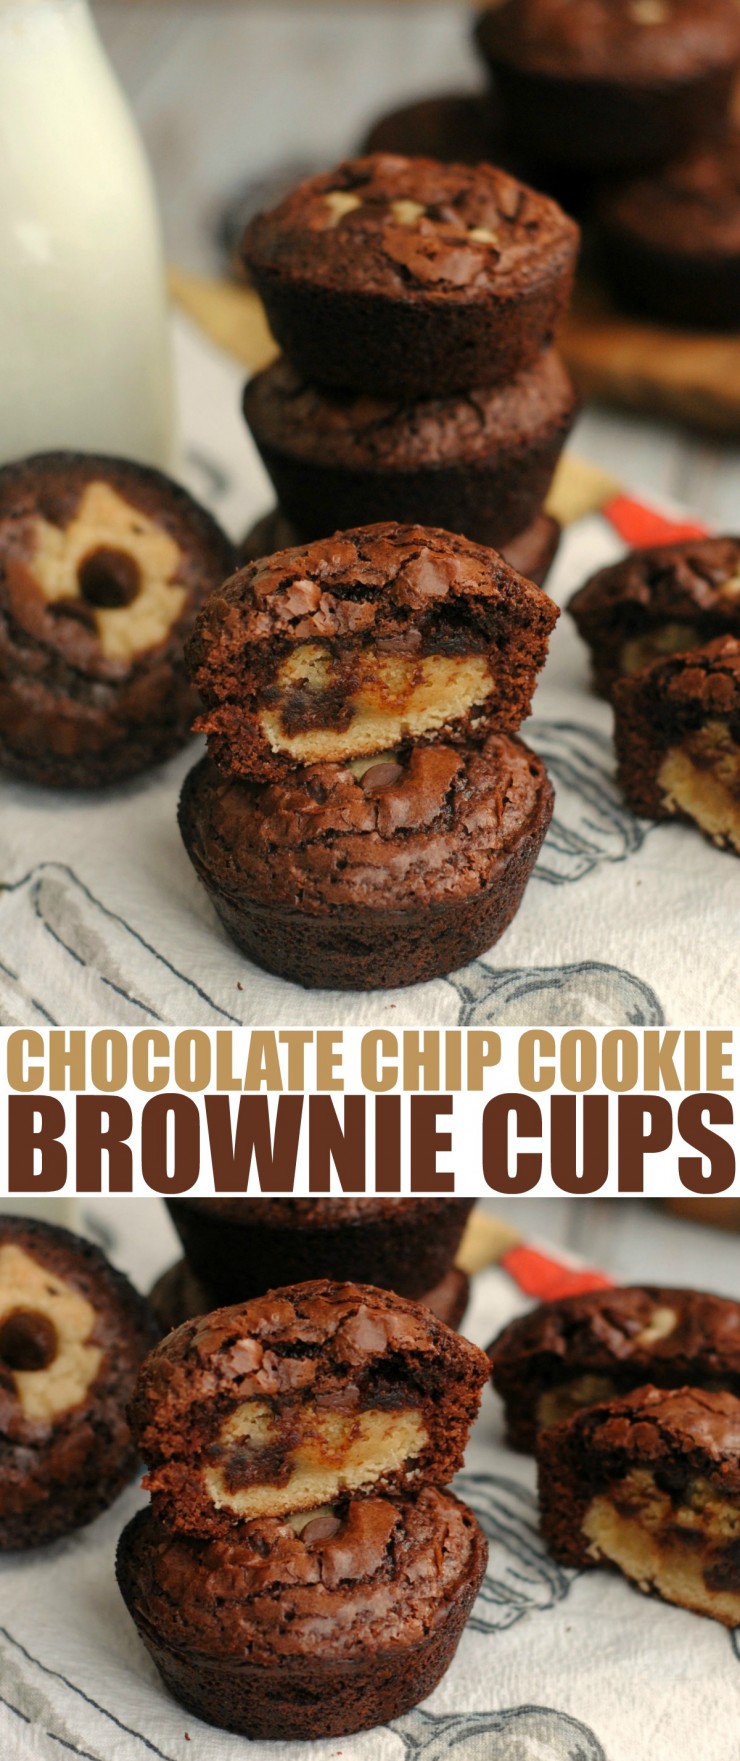 These Chocolate Chip Cookie Brownie Cups combine the best of two dessert recipe classics to create one unforgettable dessert.